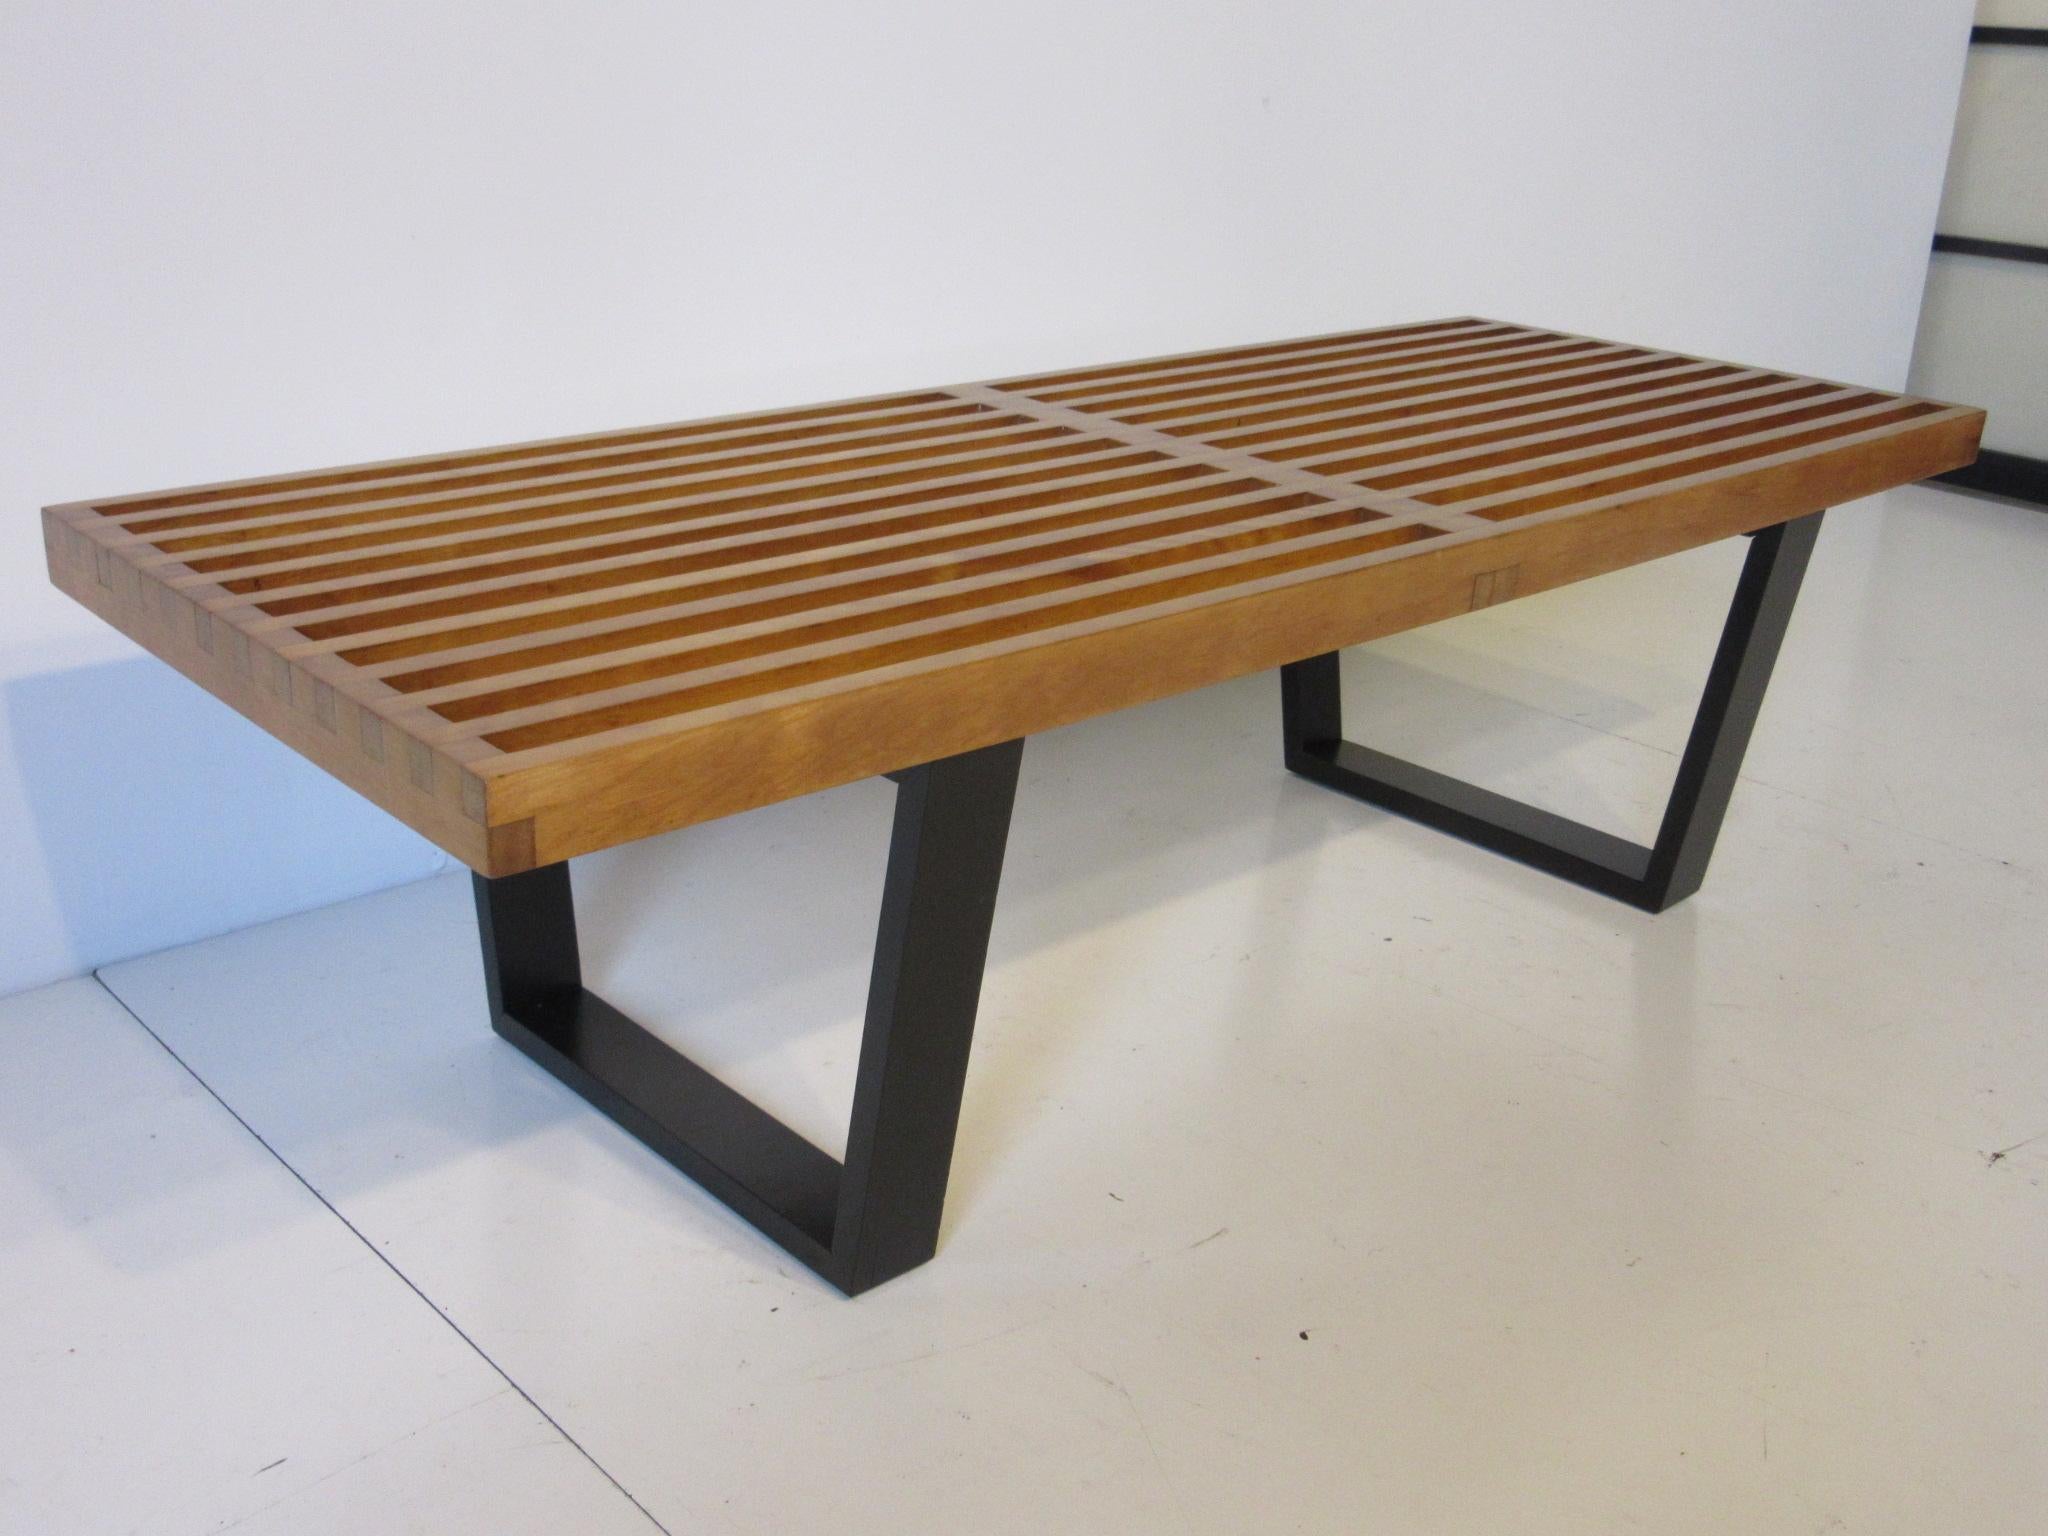 A Nelson platform bench or coffee table with natural birch wood slat top and black ebony finished legs. Perfect for the end of the bed, entrance way or living space, manufactured by the Herman Miller Furniture Company.